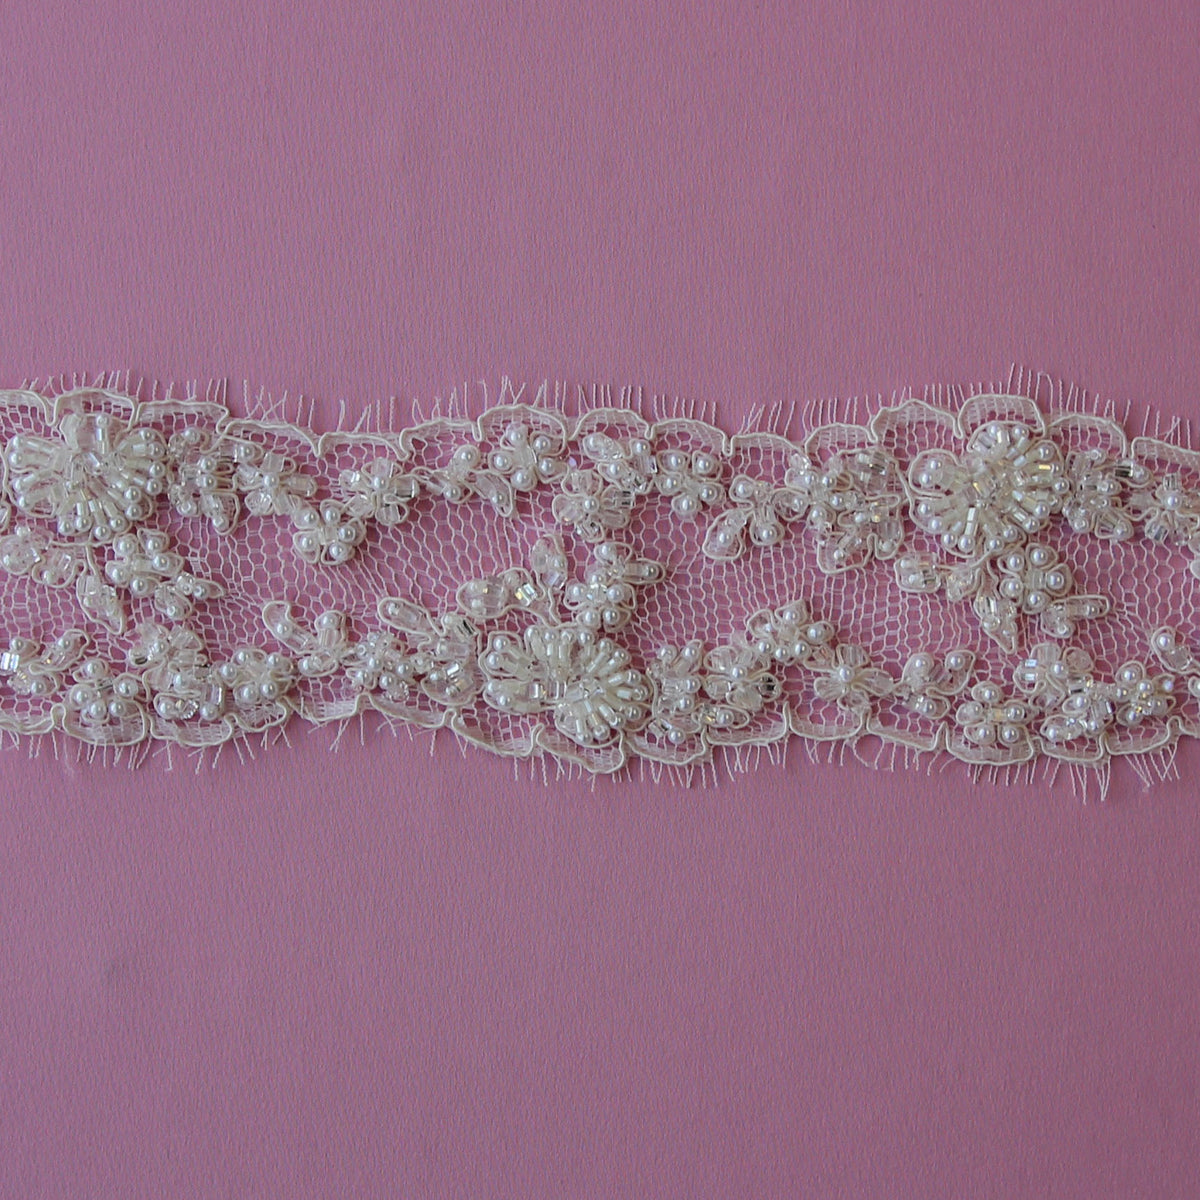 Pearl Lace Trim, Pearl Ribbon, Pearl Beaded Lace Trim, Beaded Ribbon Trim,  Bridal Sash Lace, Wedding Belt Lace, Neckline Lace, by 1 Yard 